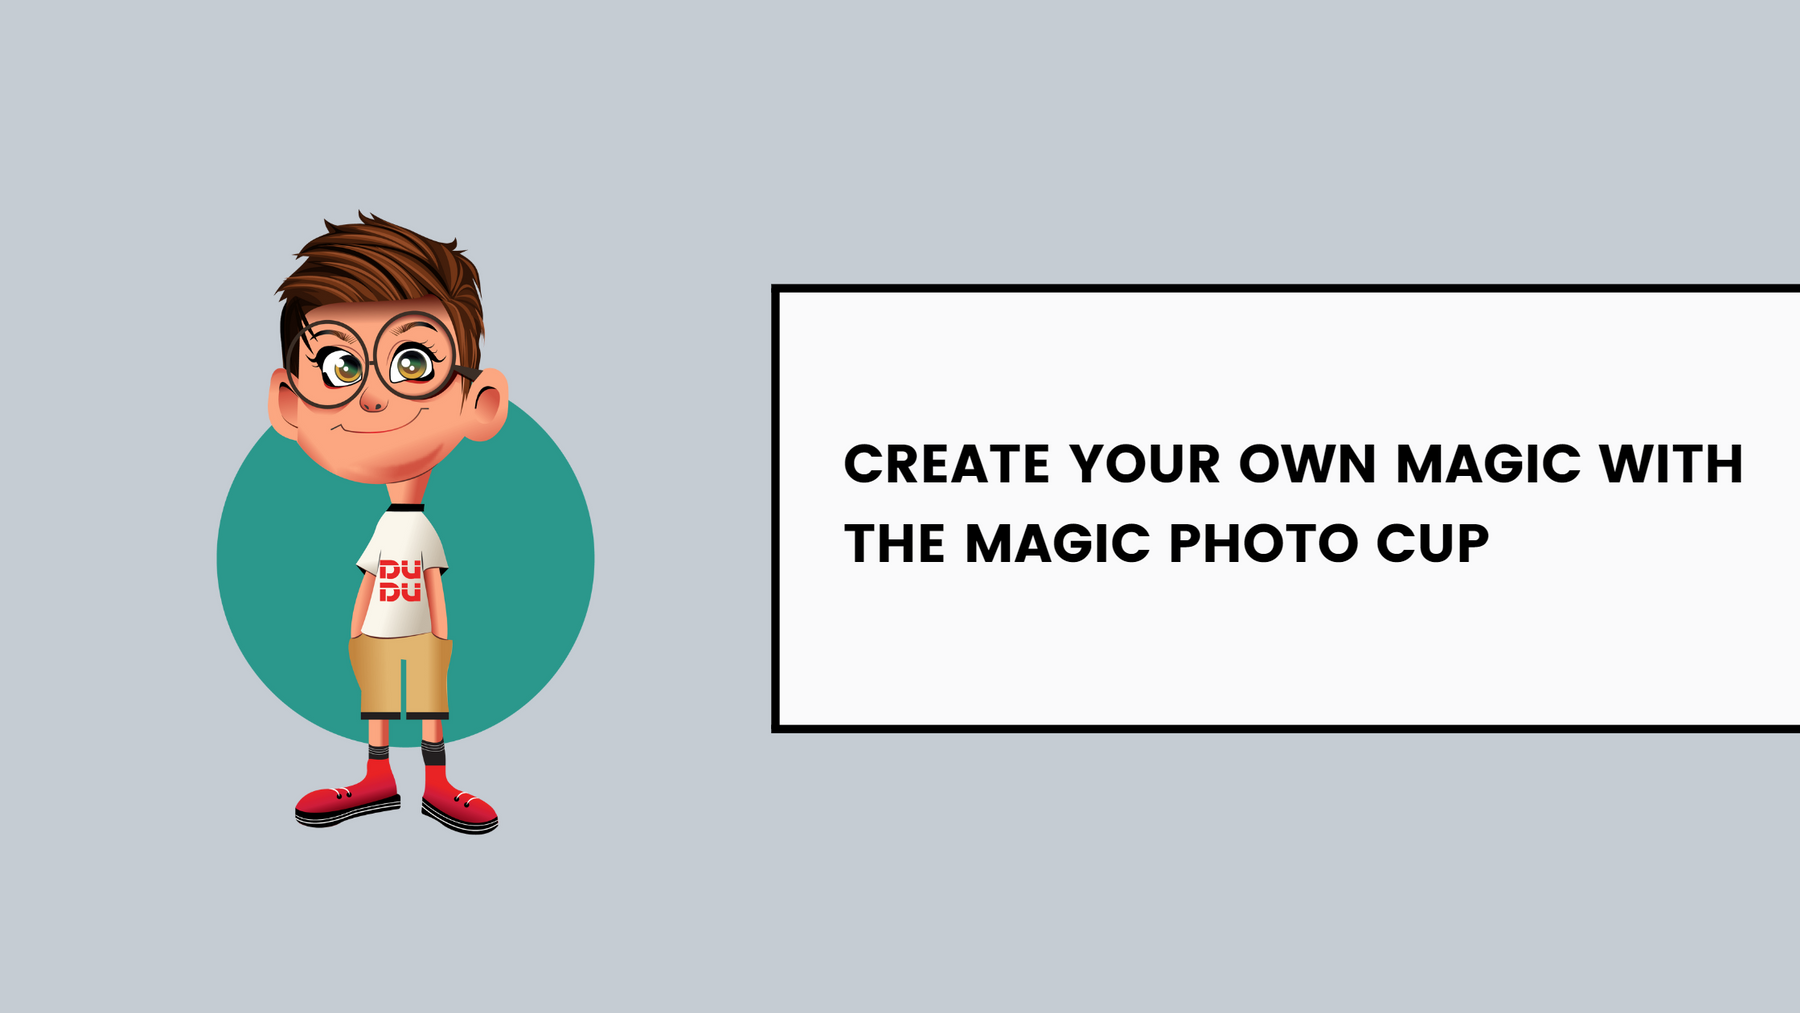 Create Your Own Magic With the Magic Photo Cup